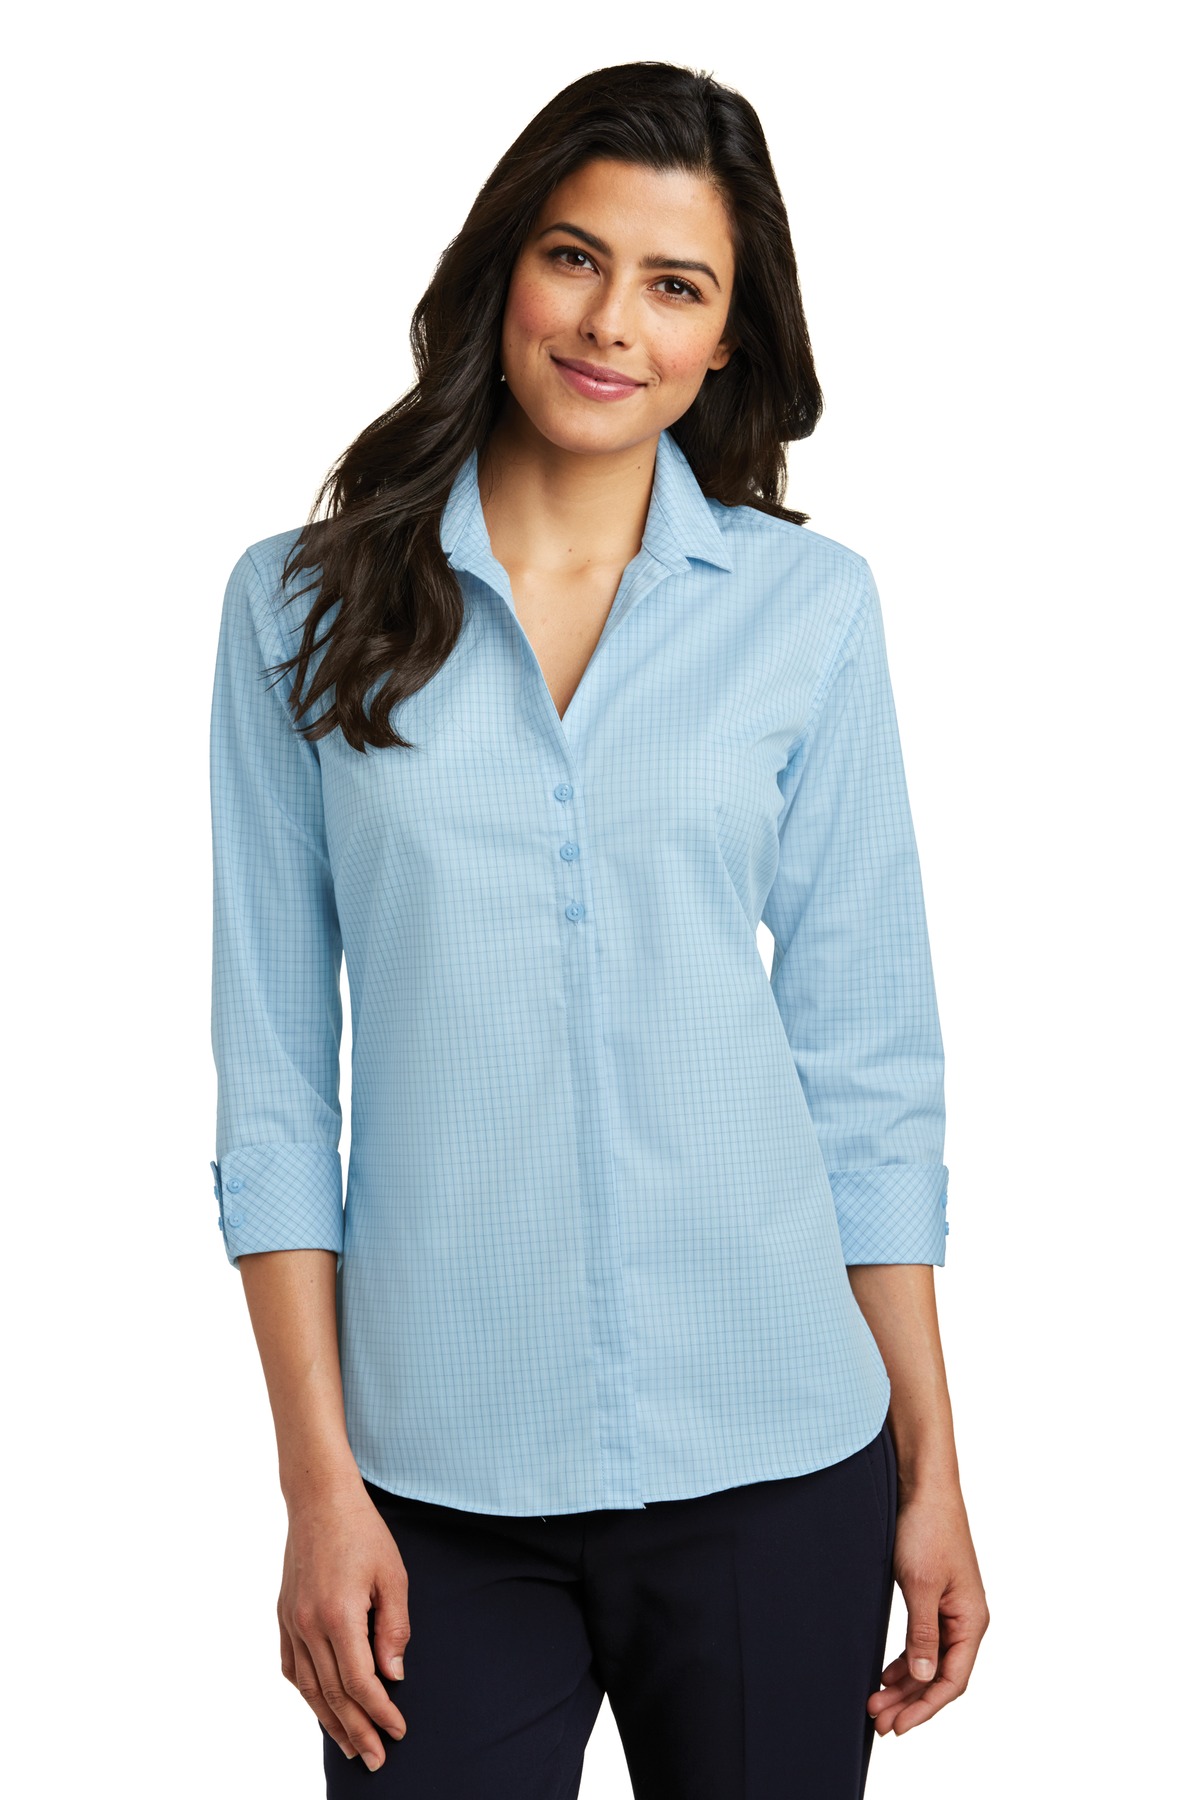 Port Authority Ladies 3/4-Sleeve Micro Tattersall Easy Care Shirt. LW643